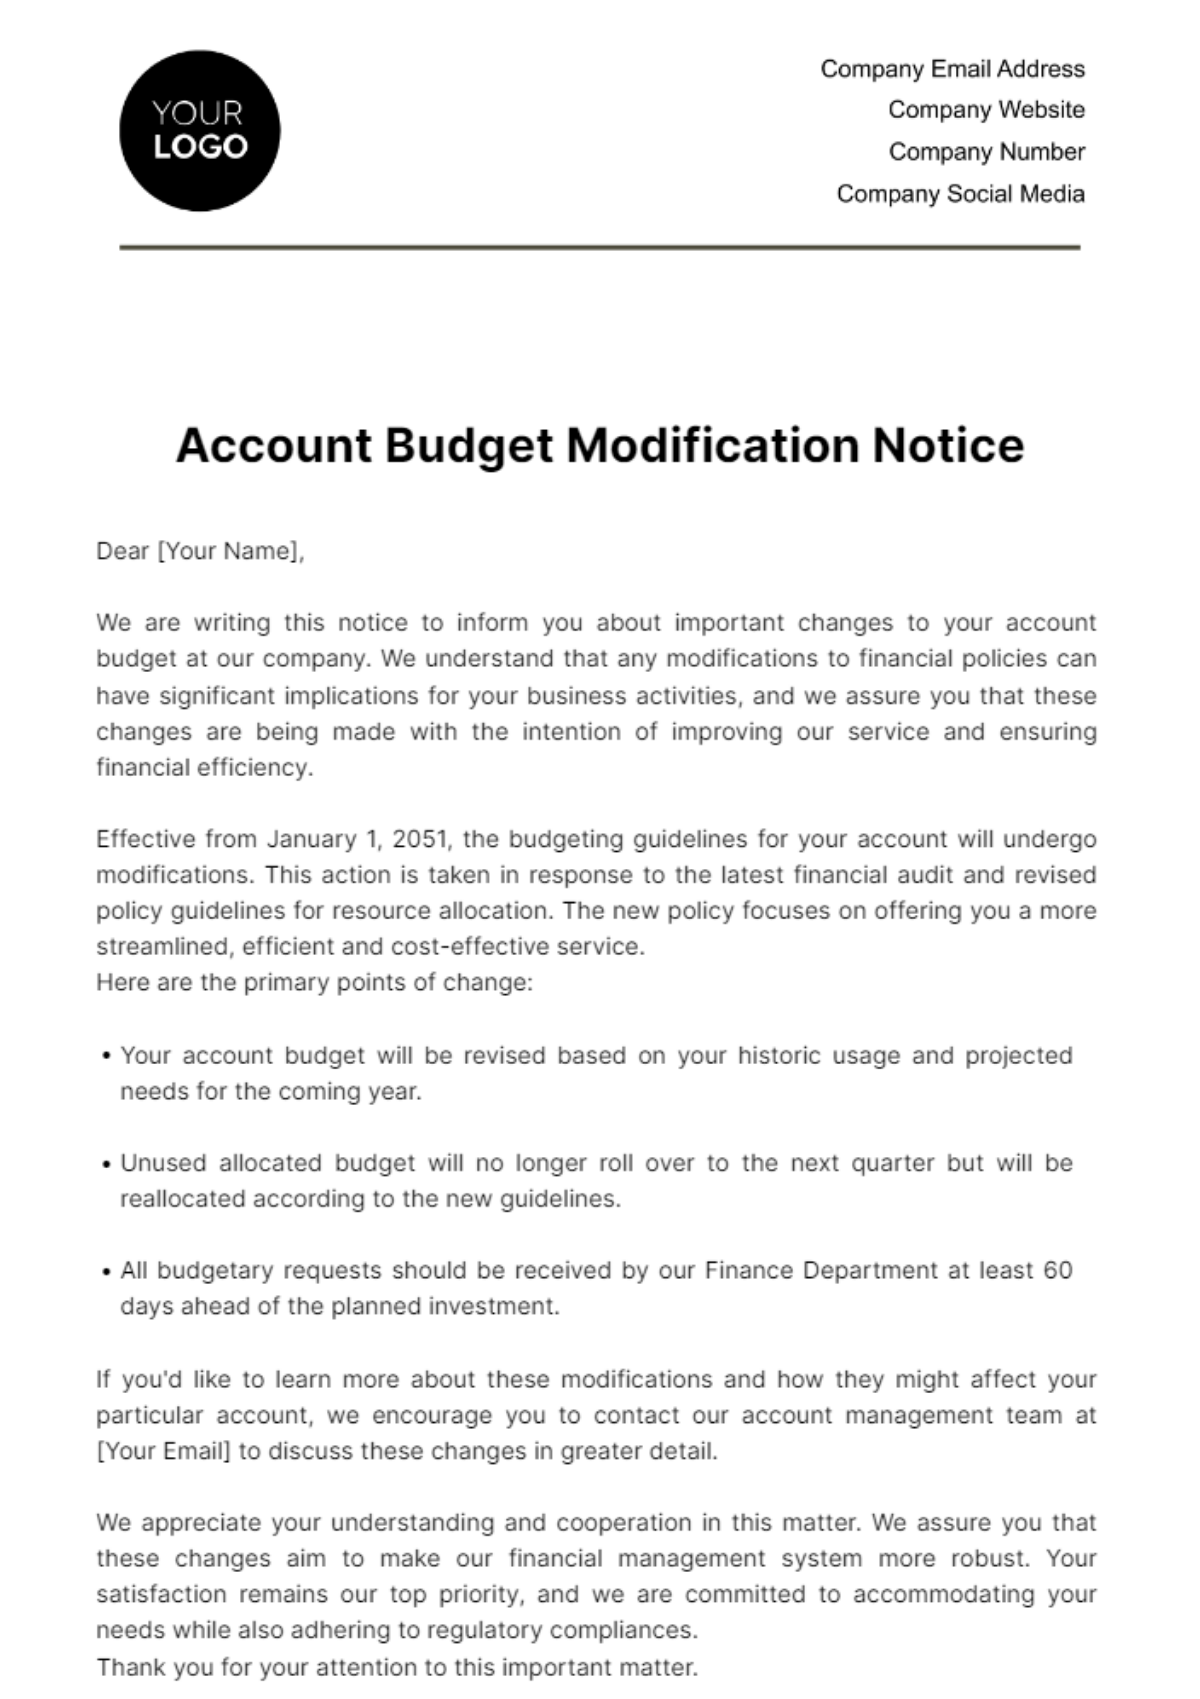 Free Account Budget Modification Notice Template